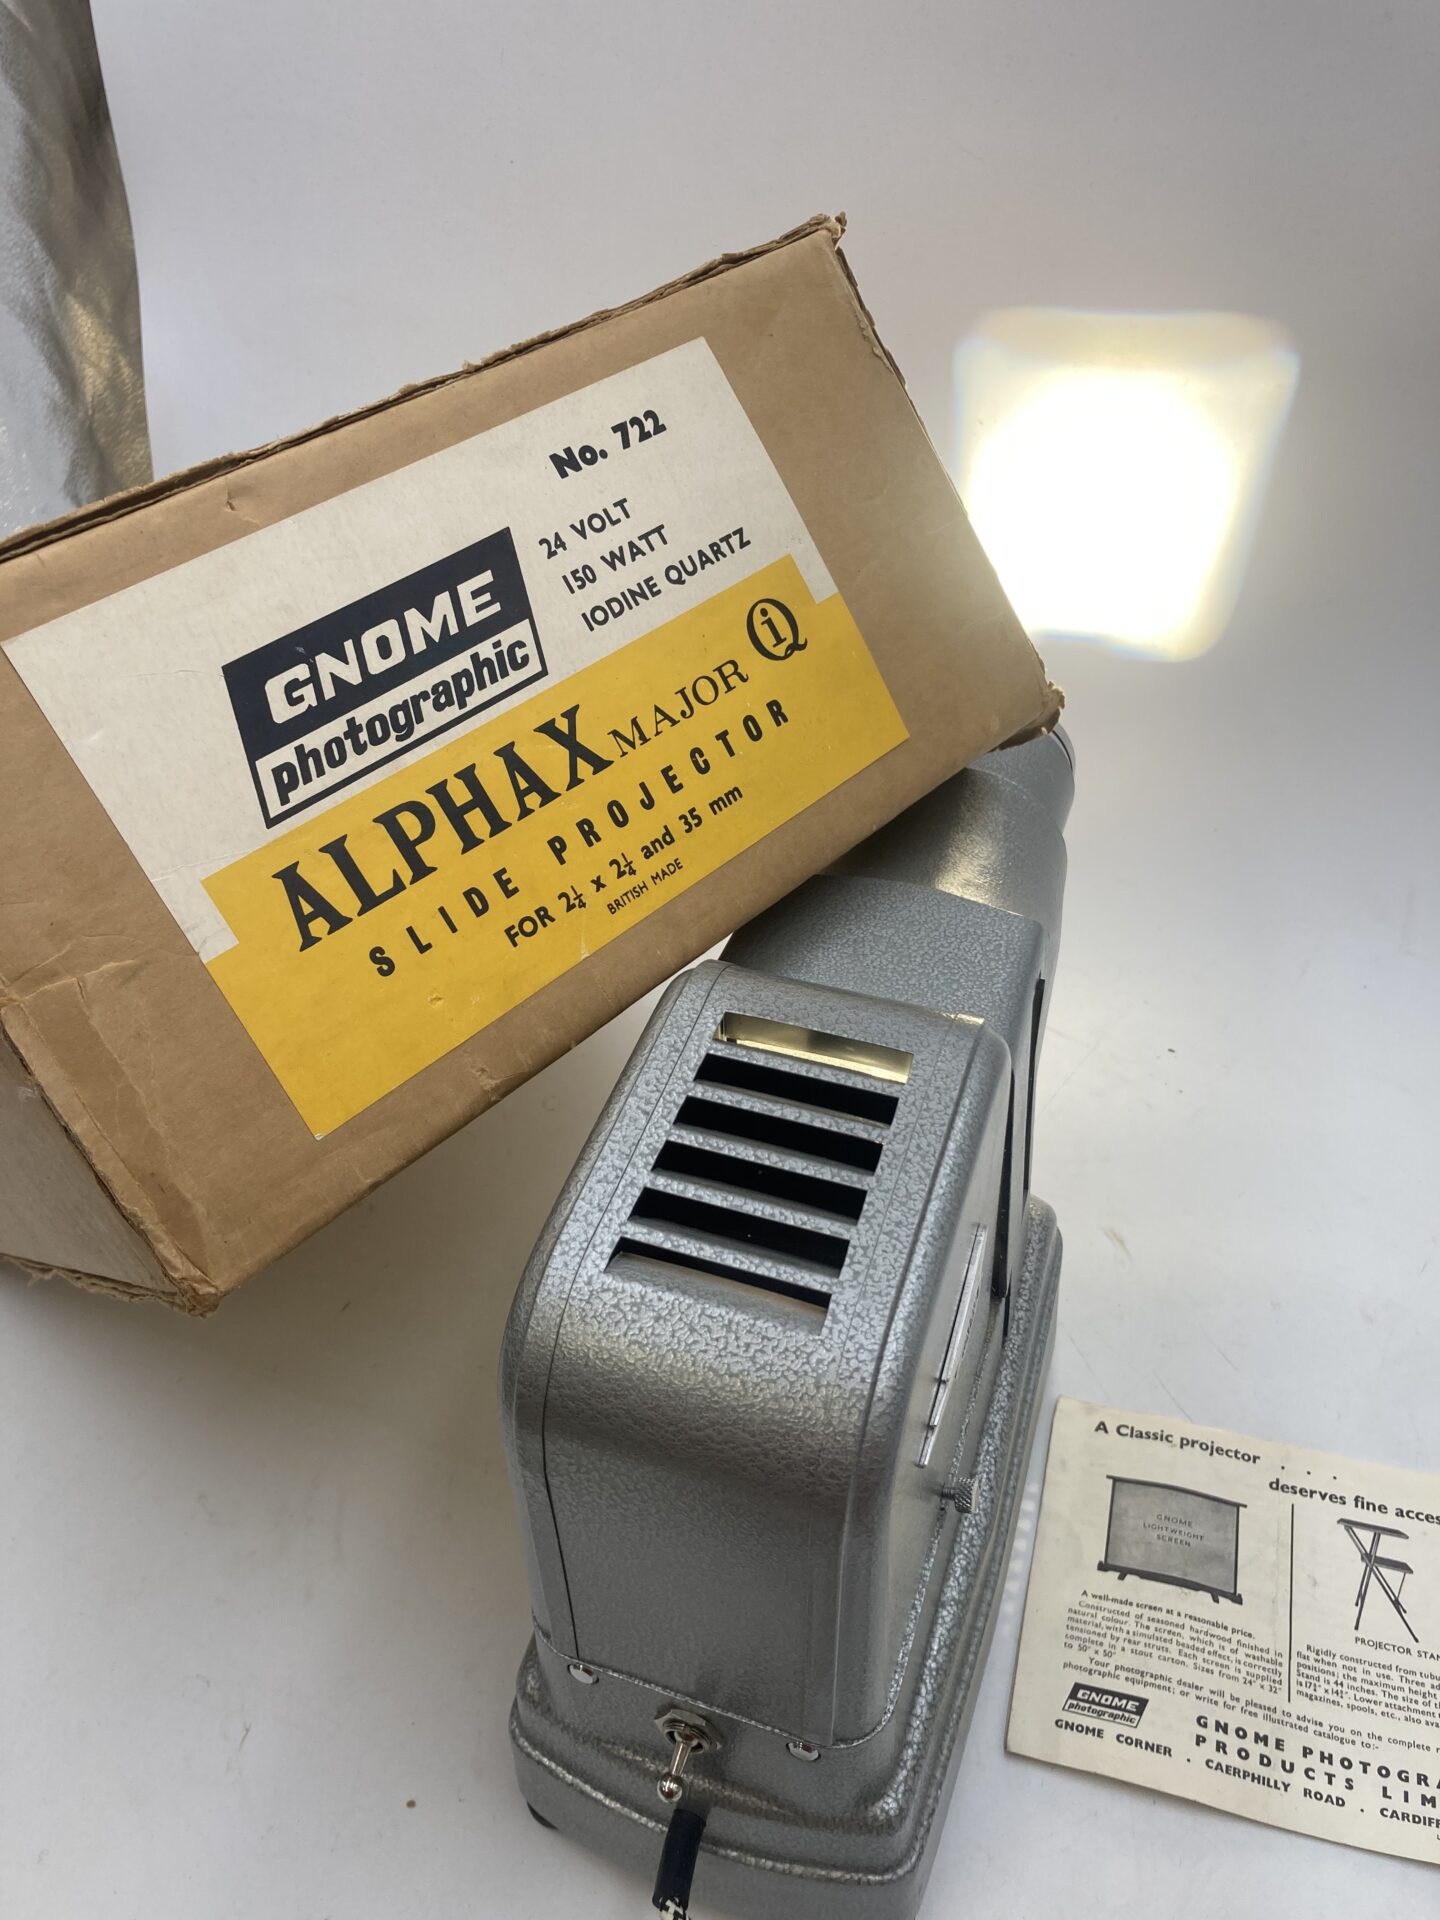 VINTAGE 'GNOME PHOTOGRAPHIC' ALPHAX MAJOR SLIDE PROJECTOR - WORKING USED BOXED